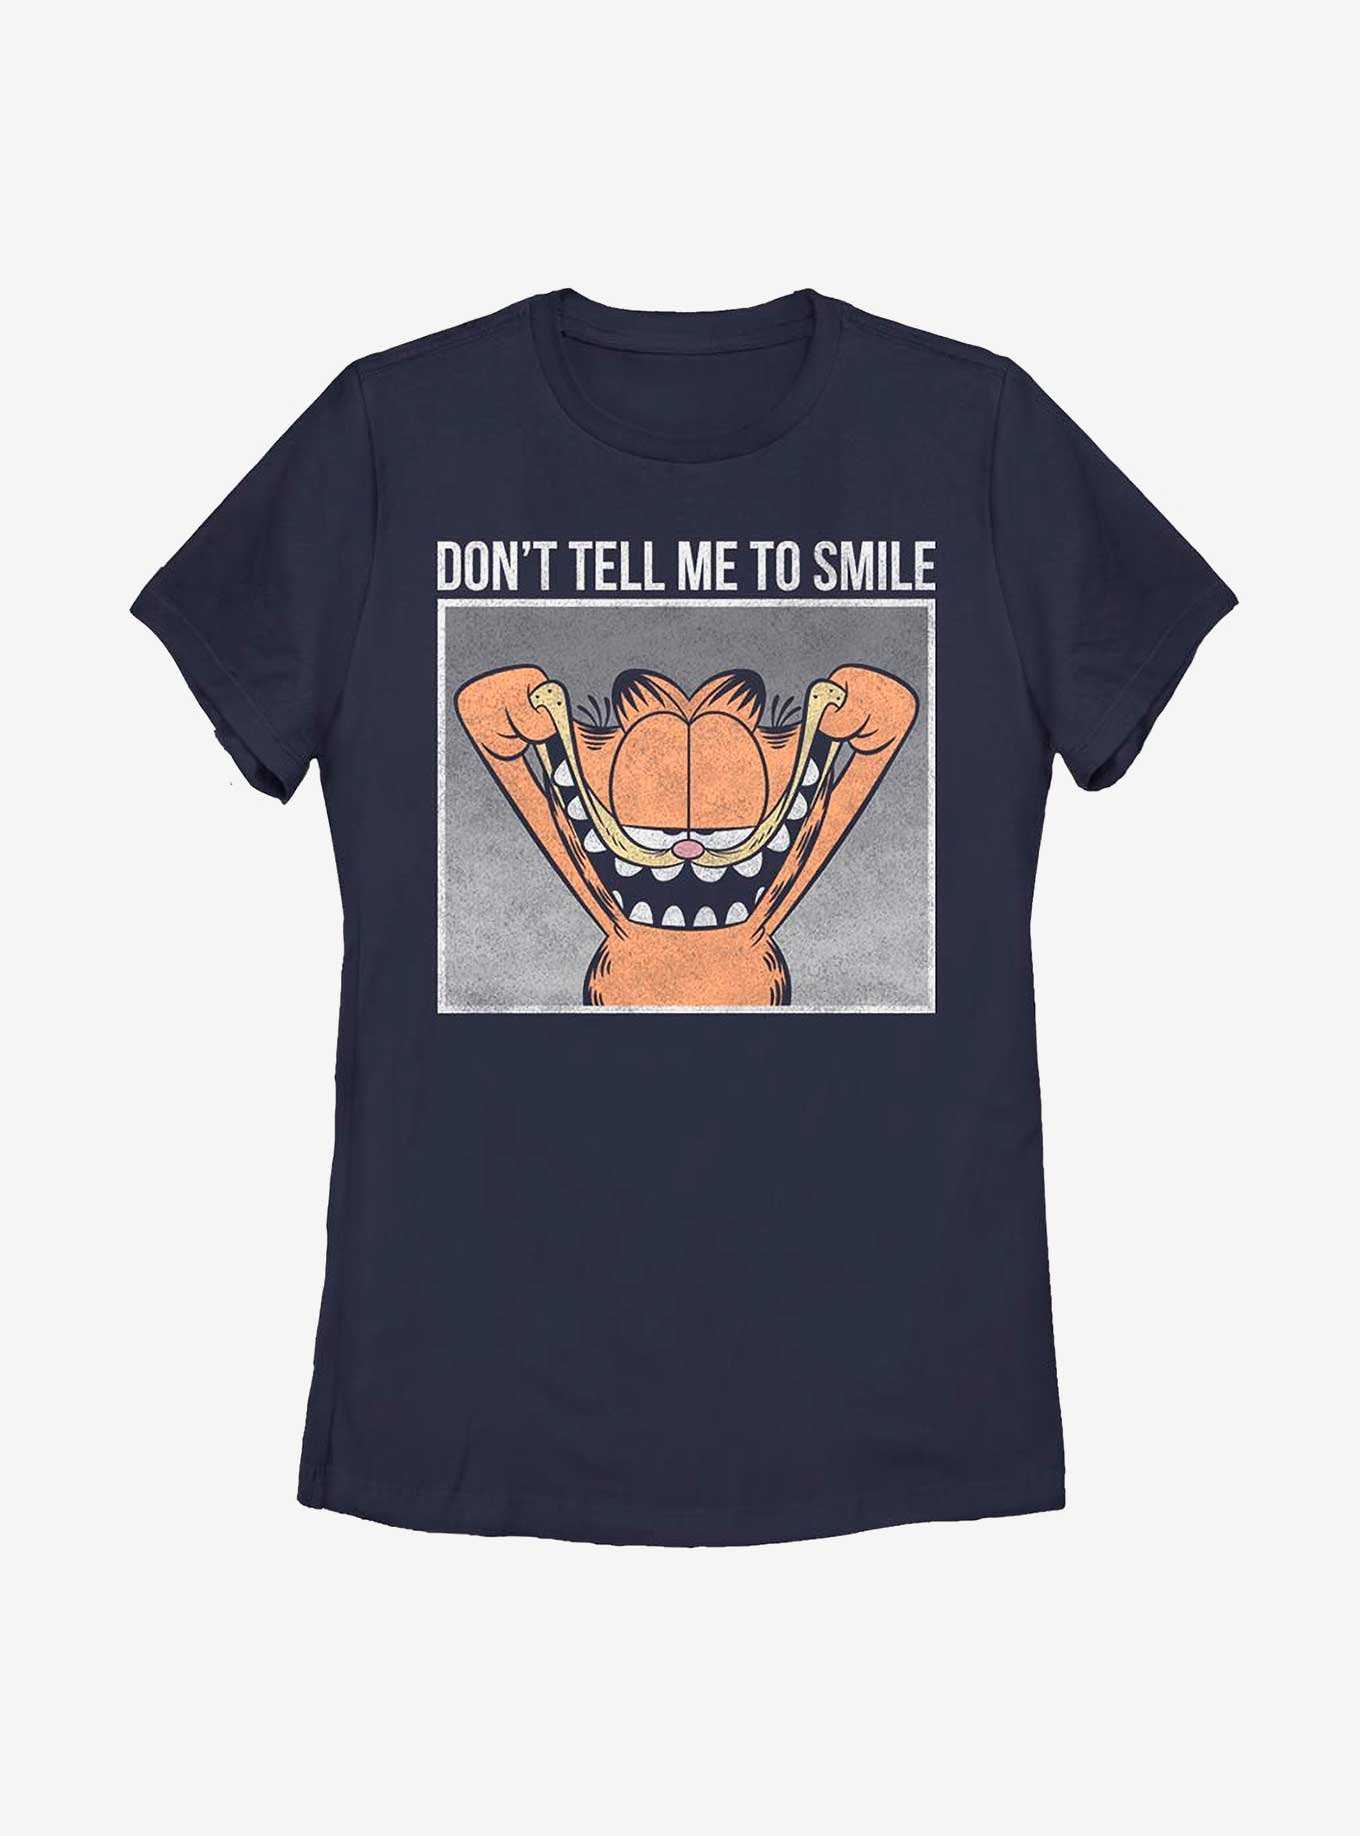 Garfield Don't Tell Me To Smile Women's T-Shirt, , hi-res